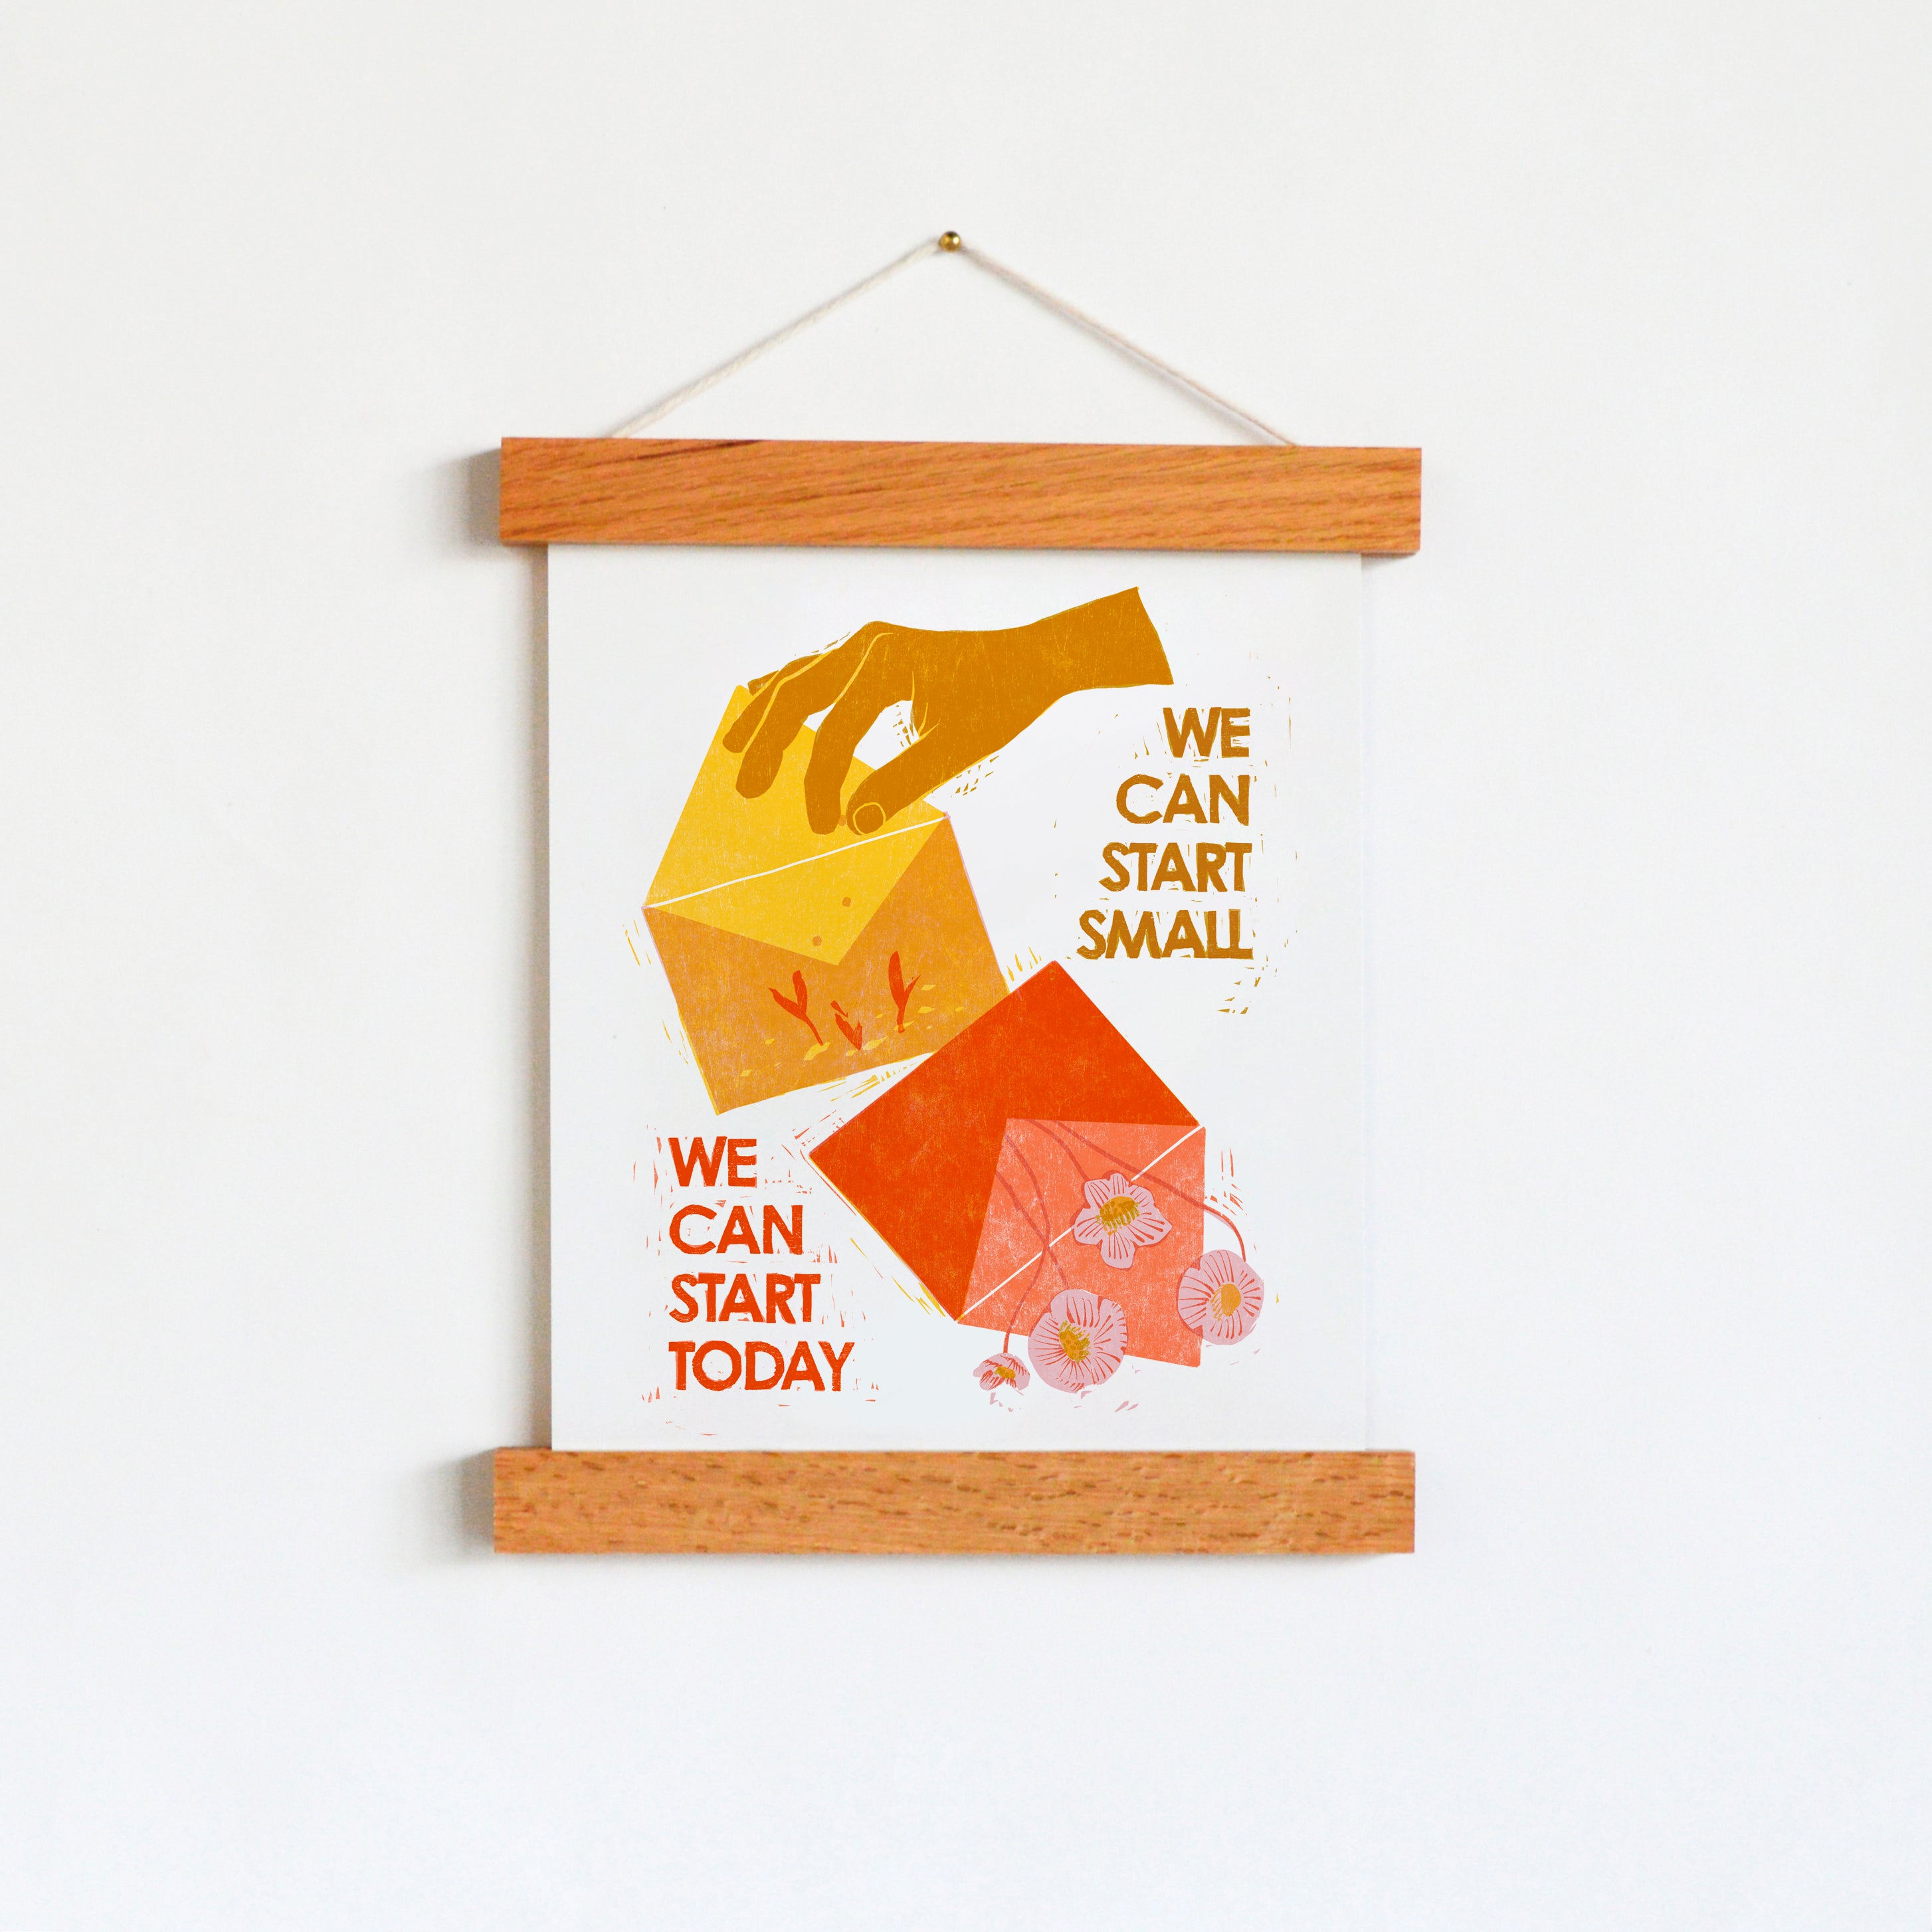 An image of an art print hanging in a frame with an image of a hand planting seeds in an envelope that says "We can start small, we can start today."